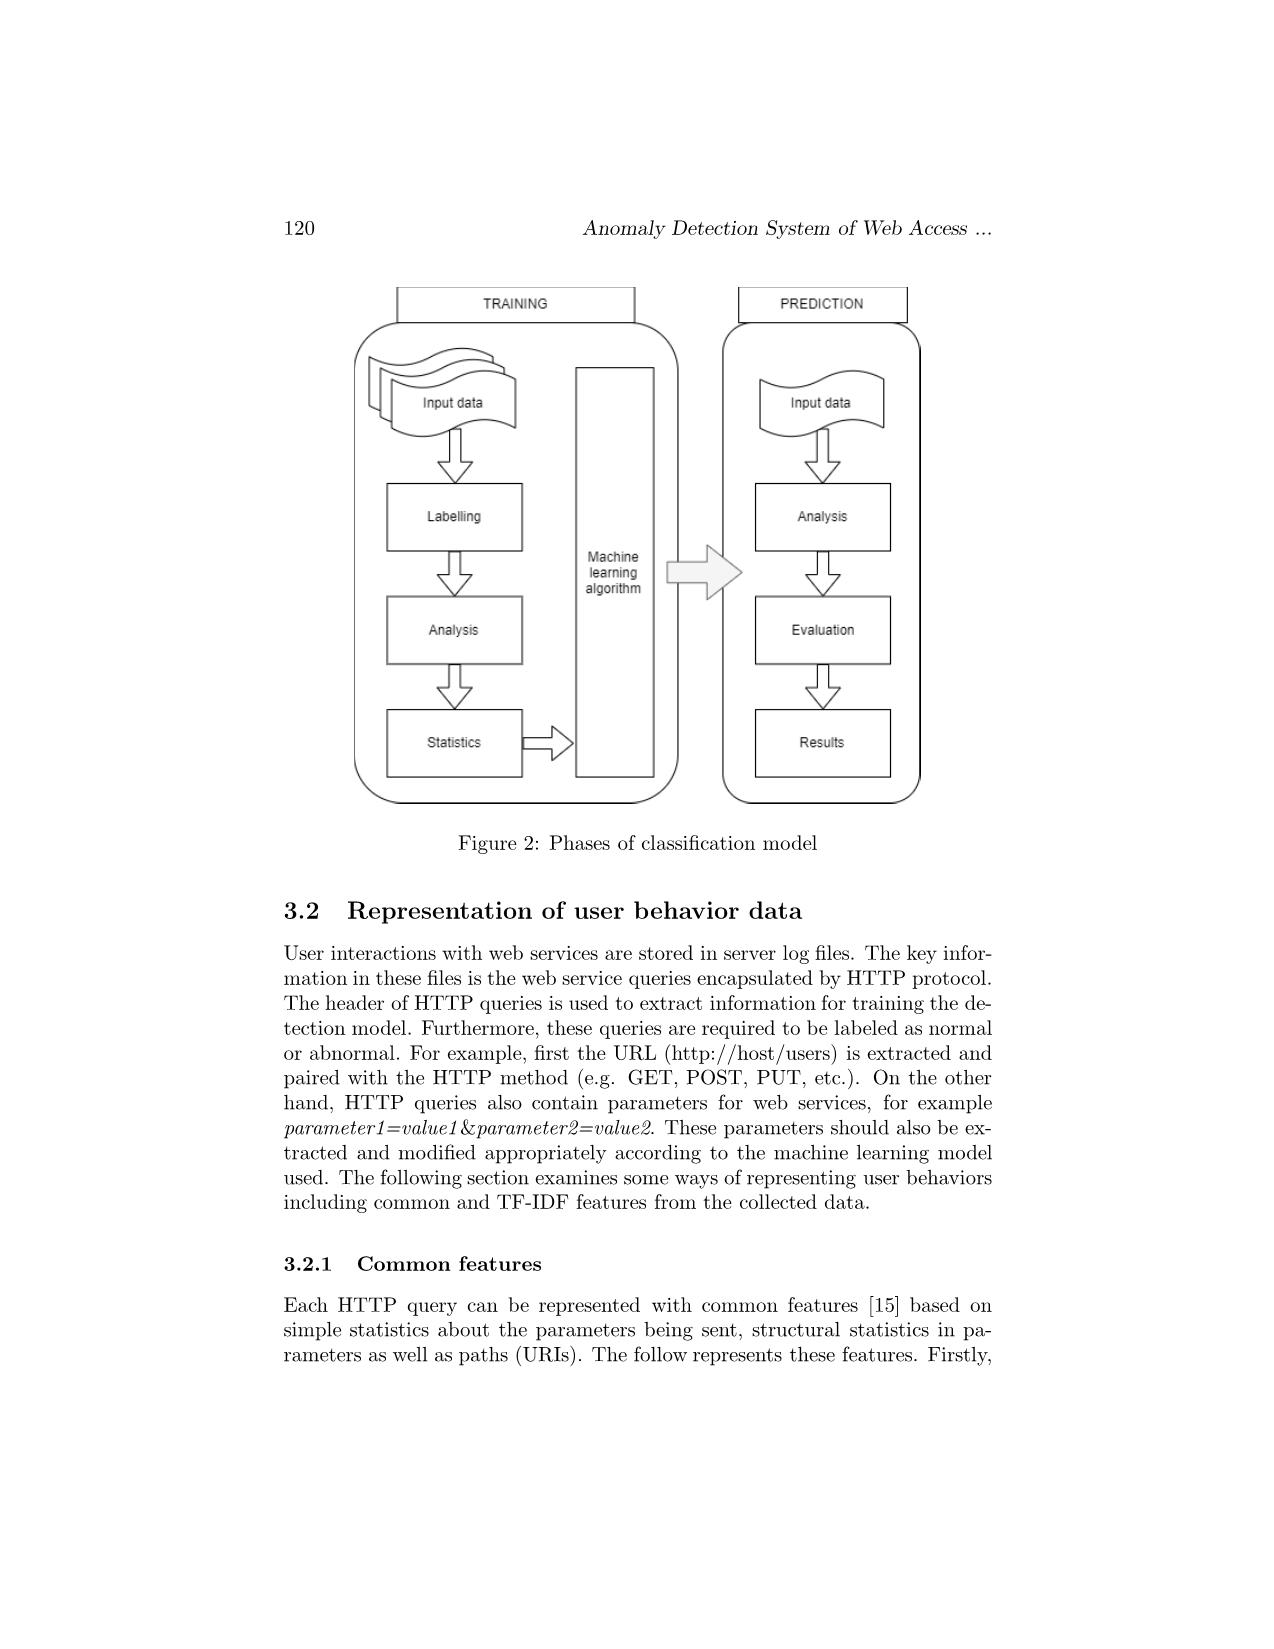 Anomaly detection system of web access using user behavior features trang 6